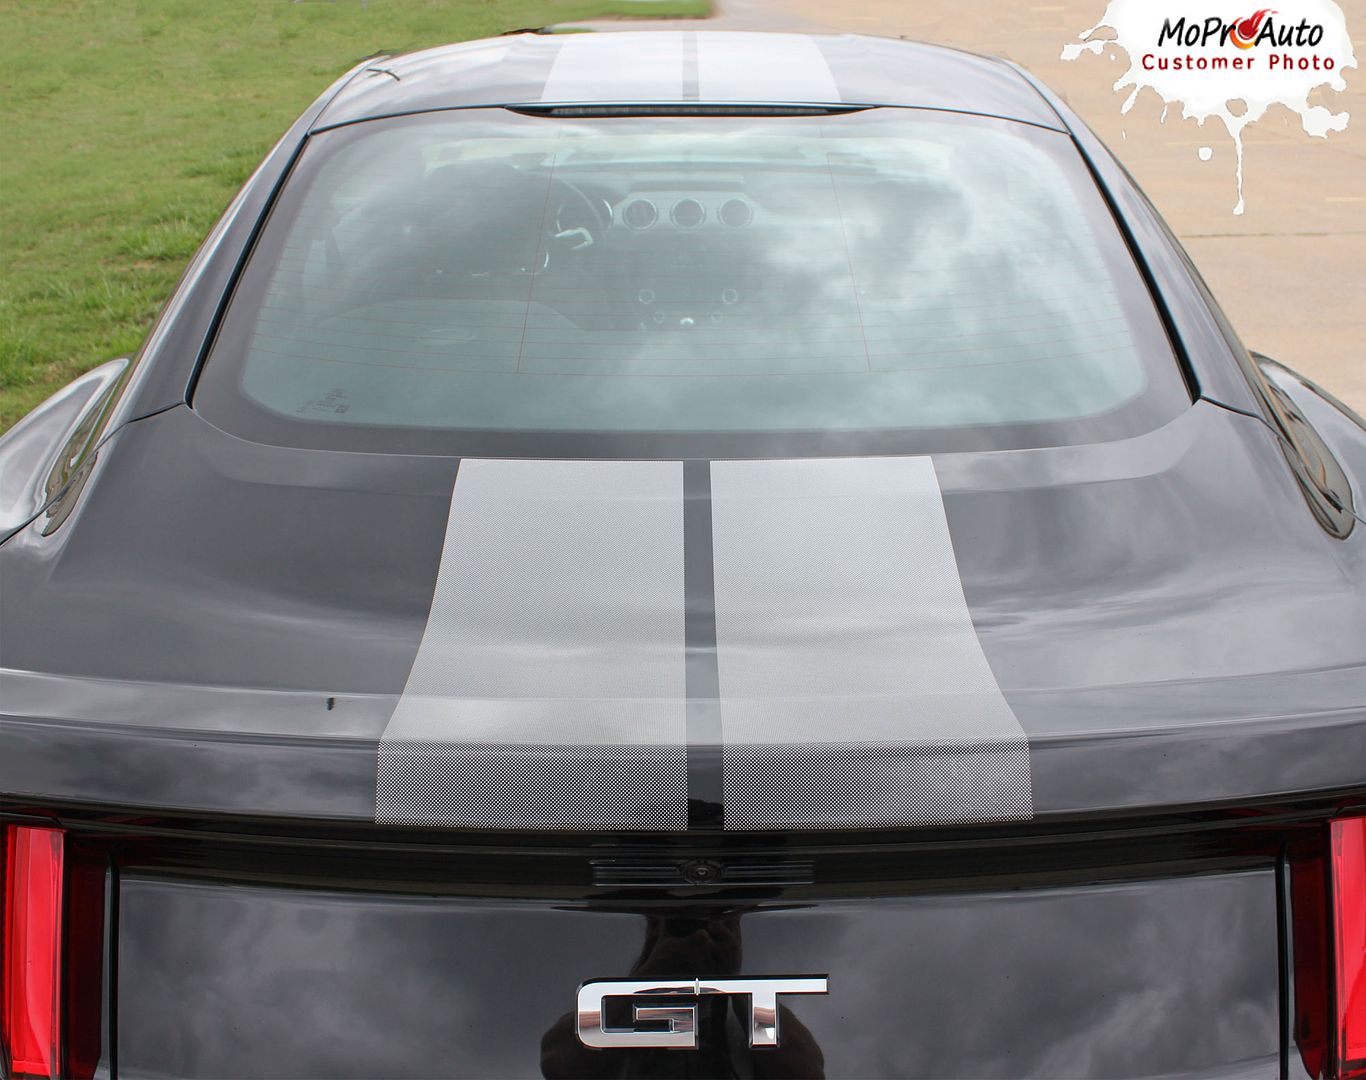 Fade Fading Fader Ford Mustang Racing Hood Rocker Stripse  MoProAuto Pro Design Series Vinyl Graphics, Stripes and Decals Kit